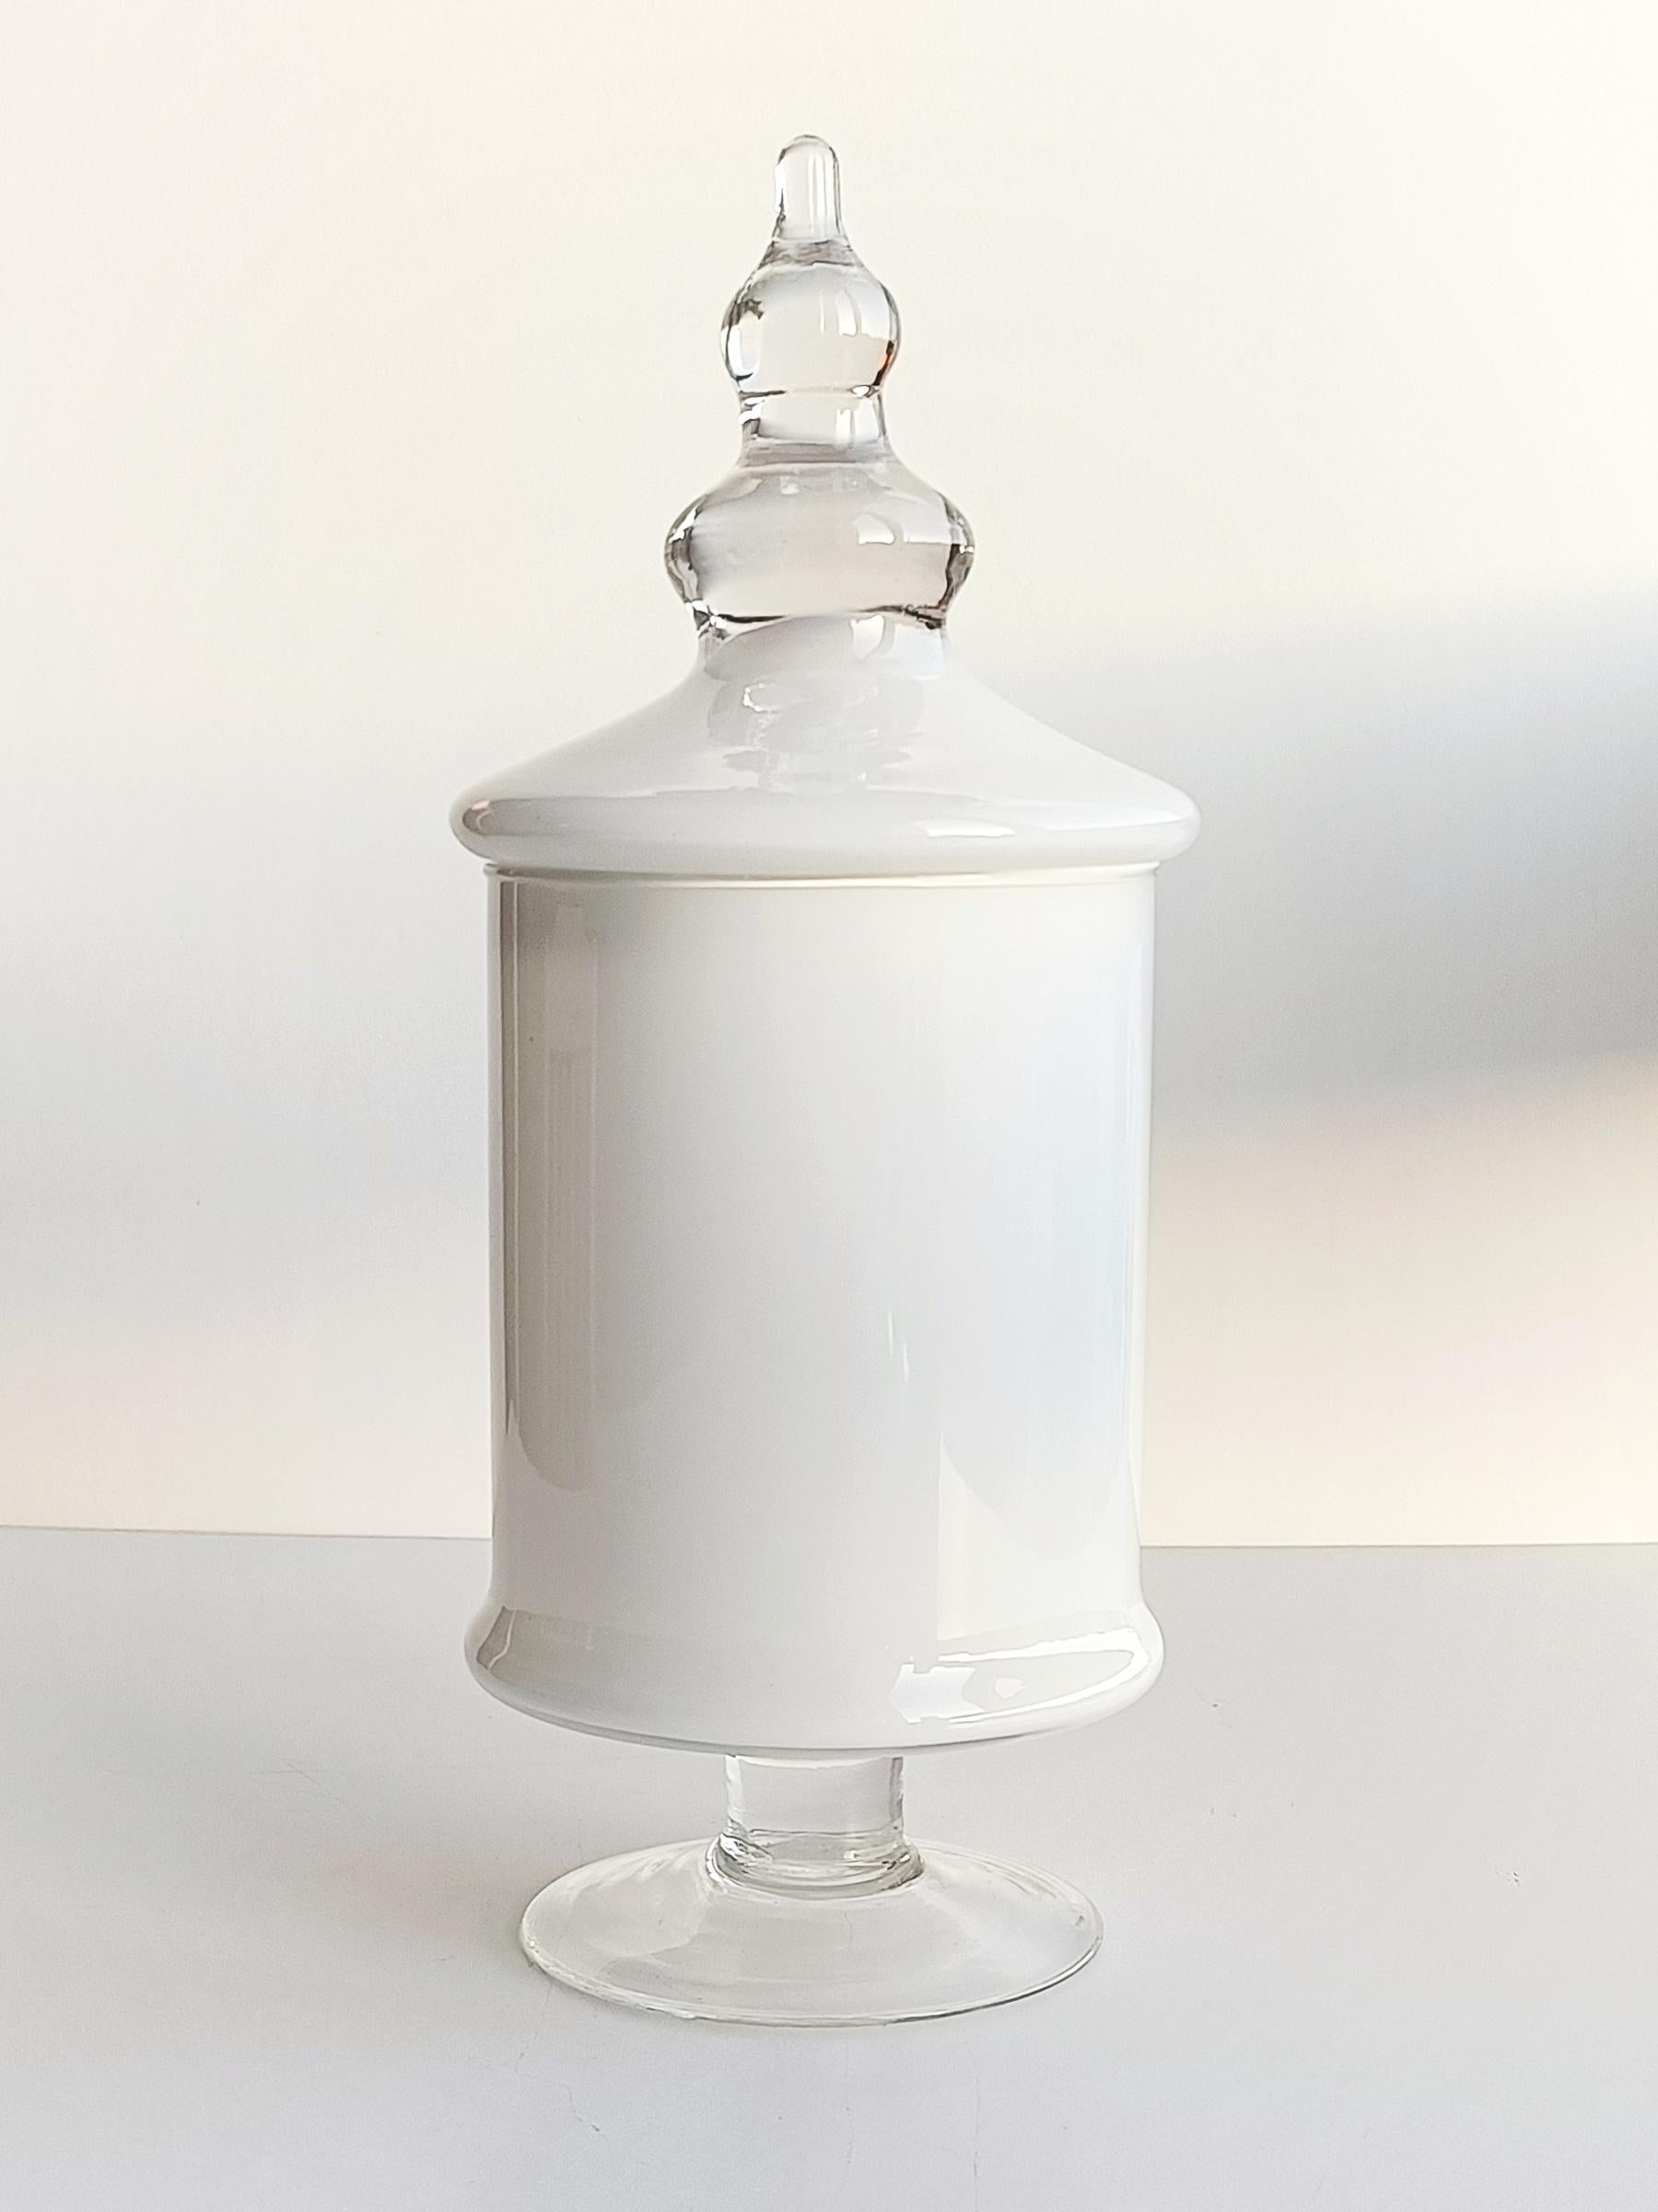 Elegant hand-blown Murano glass bombon jar. Delicately crafted, this jar showcases a combination of a thin layer of clear glass lined by an equally thin white casing. The lid handle and base are made from clear glass. 

Standing at a height of 33cm